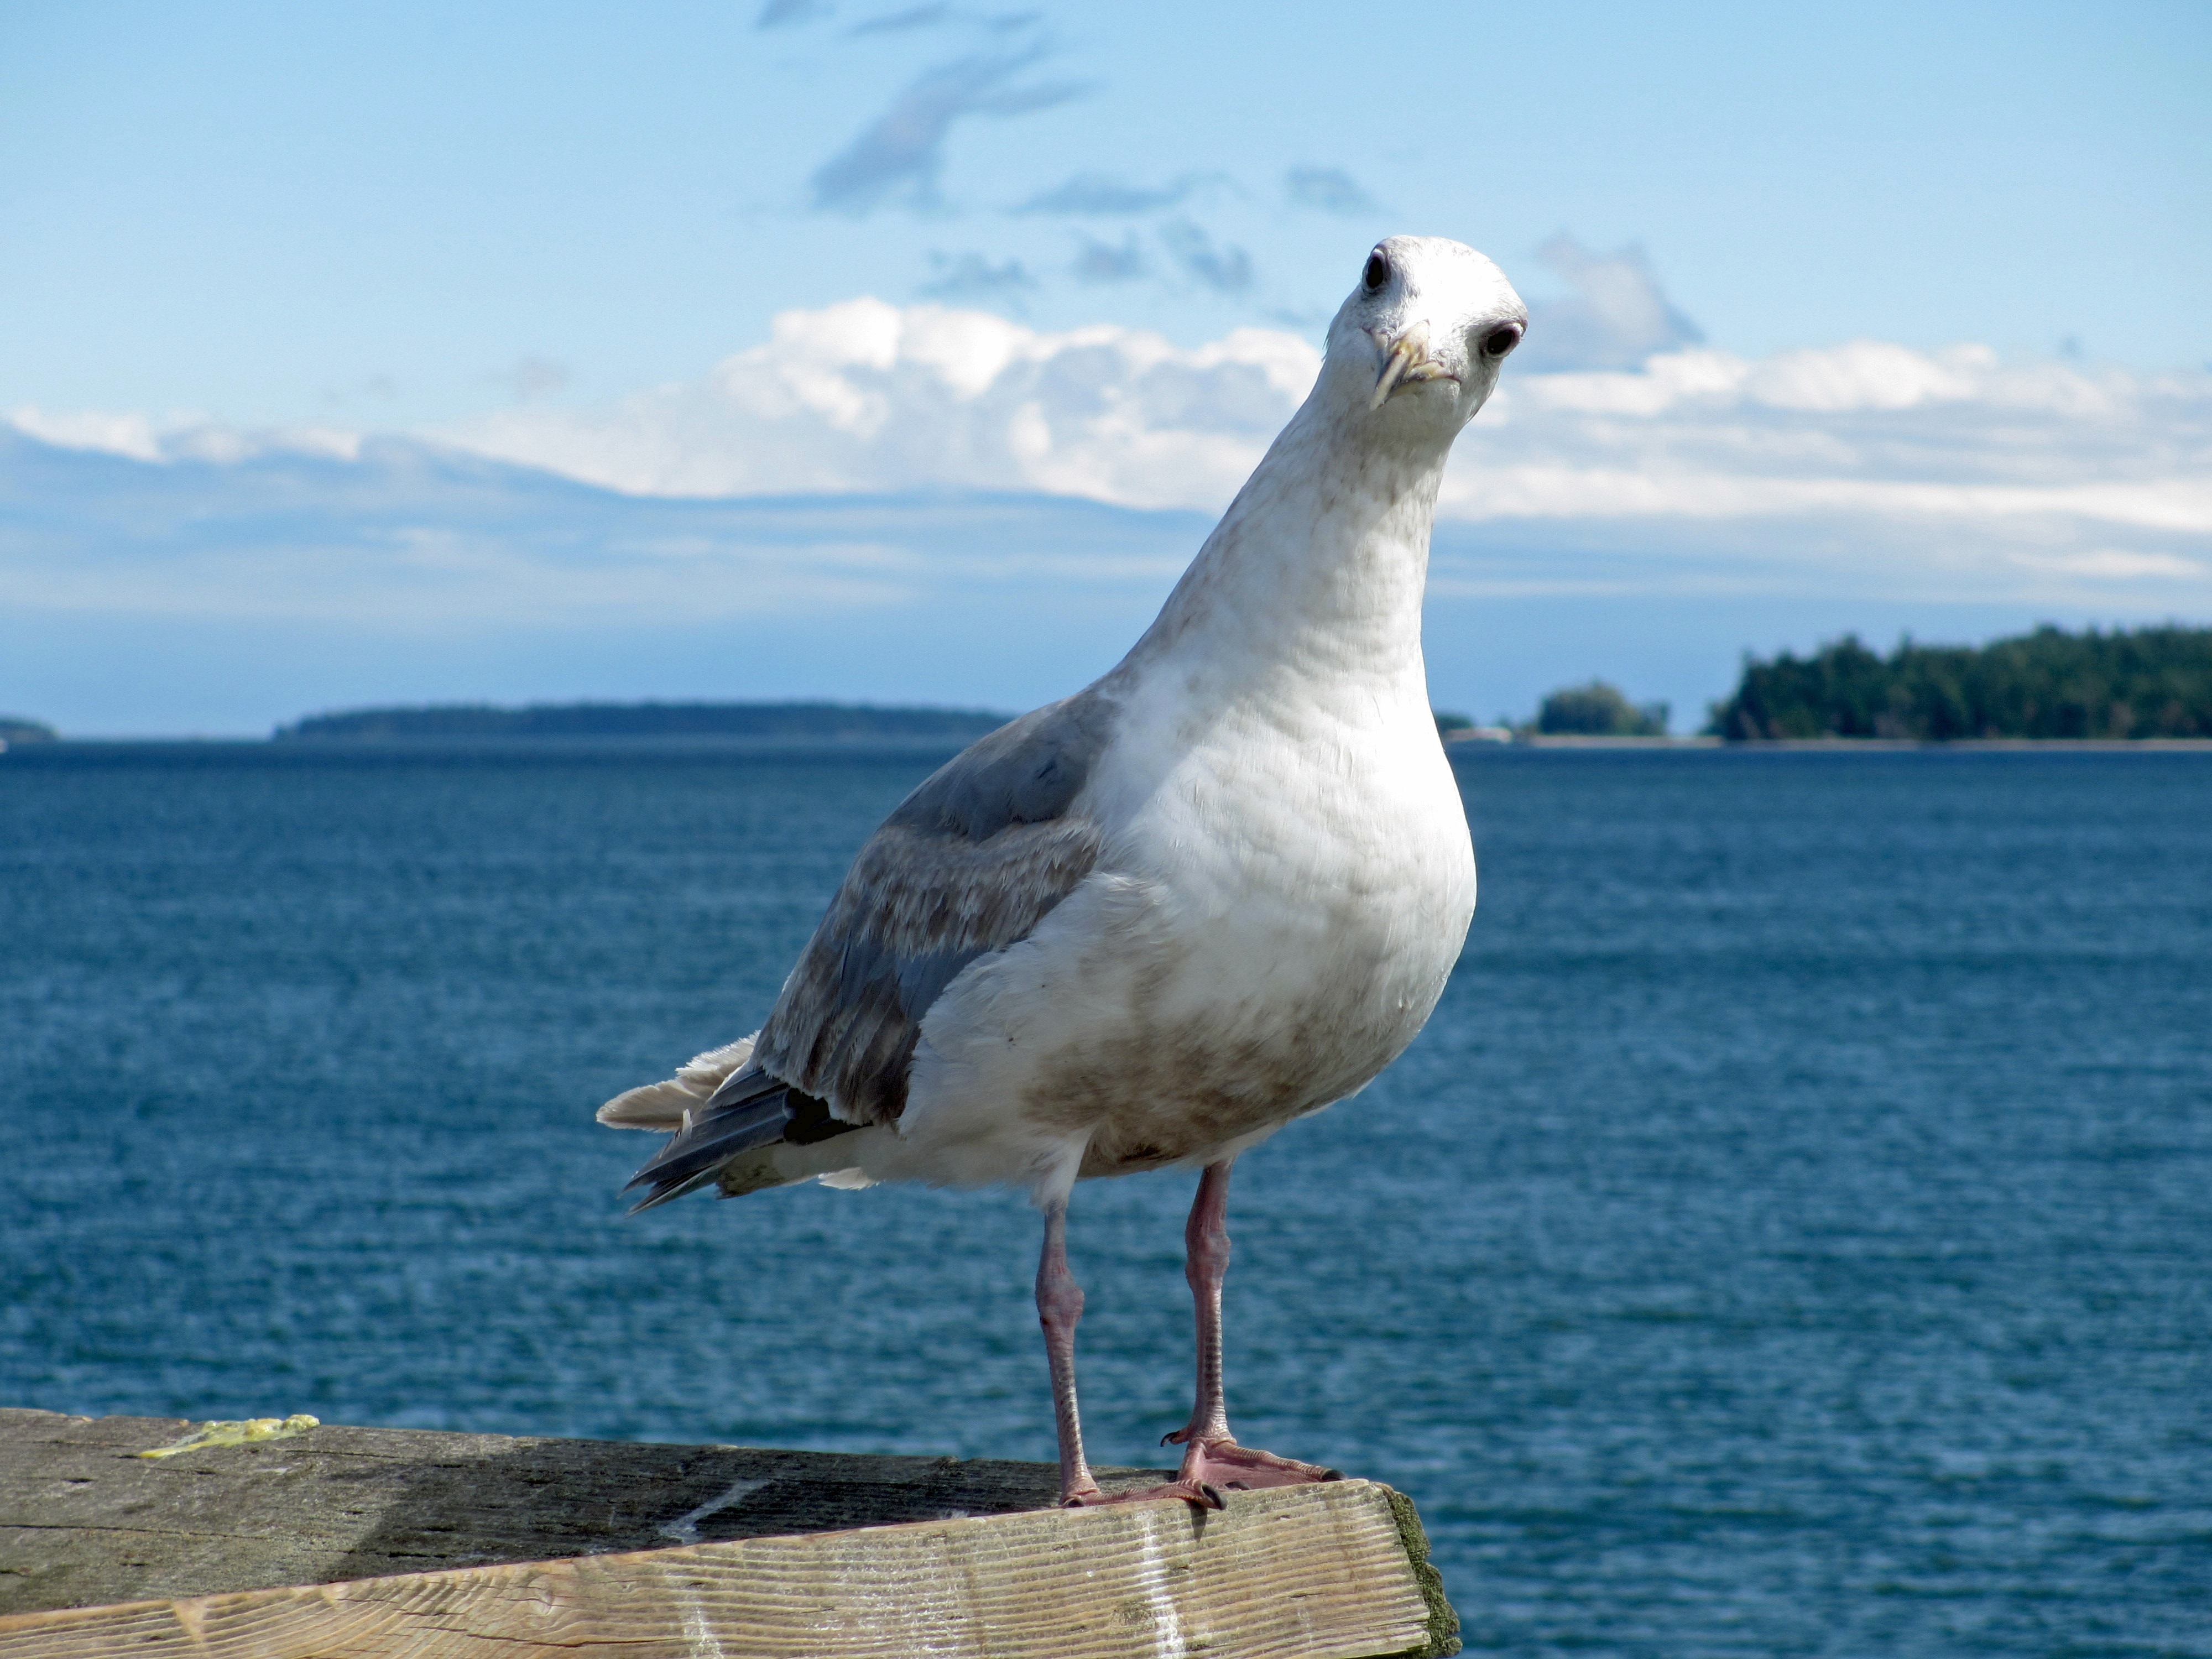 white and grey seagull at daytime